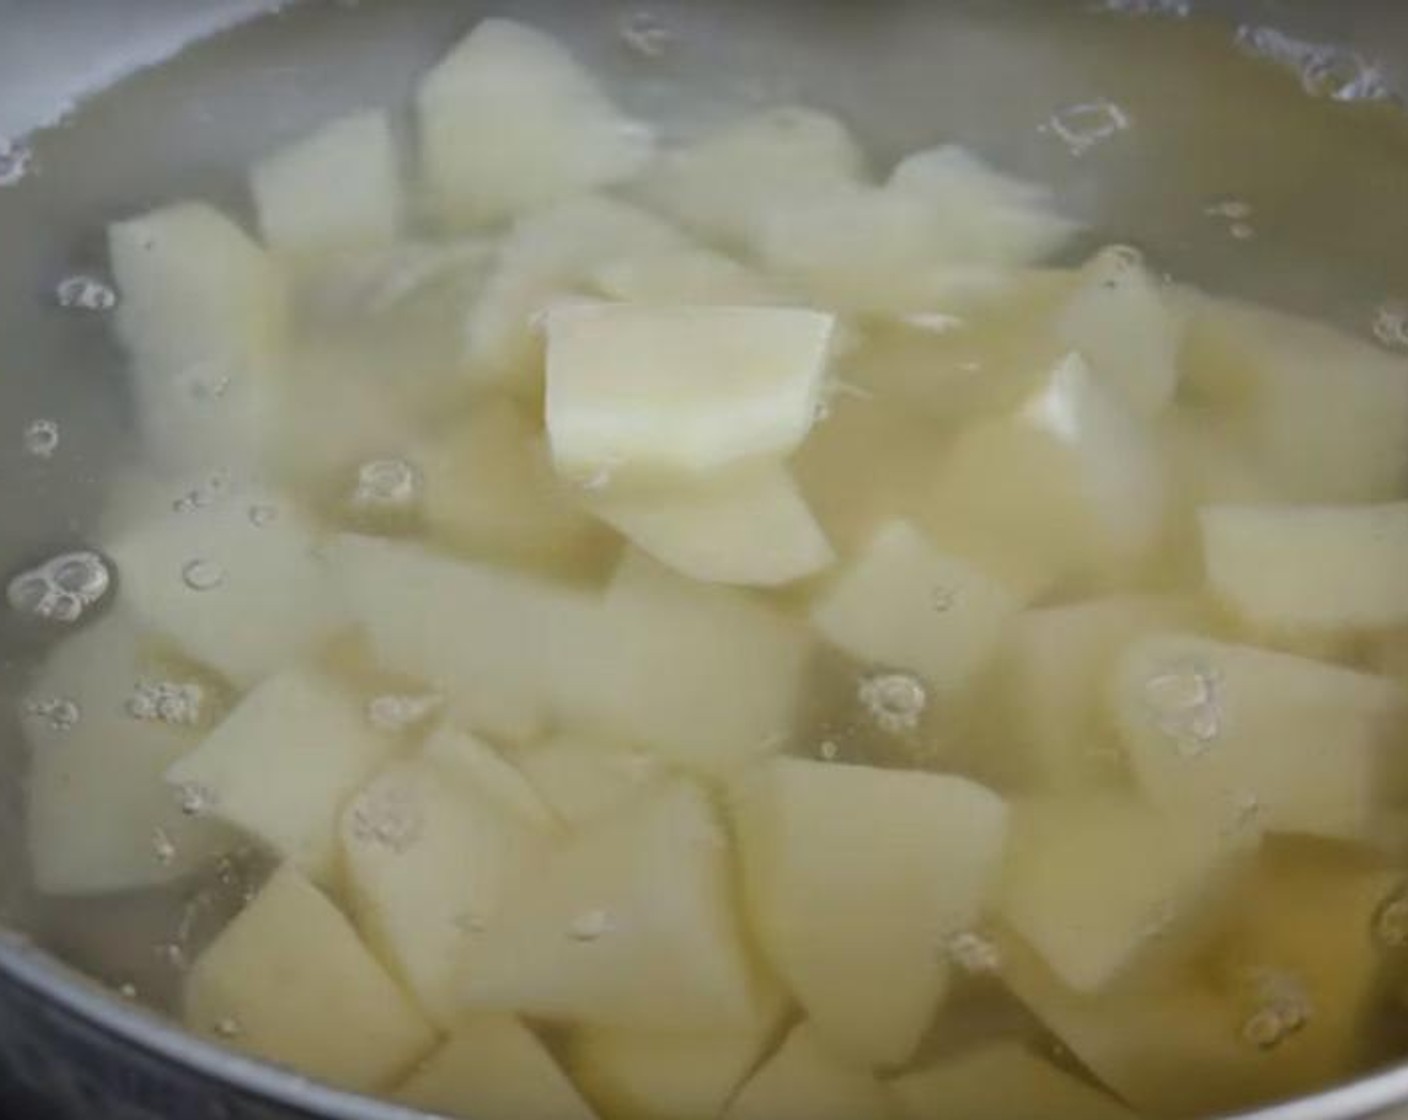 step 1 Halve the Red Potatoes (6 cups), or quarter them, if they are larger. Put them into a large pot of cold salted water, boil until potatoes are just cooked through, they should be tender not mushy. Drain.